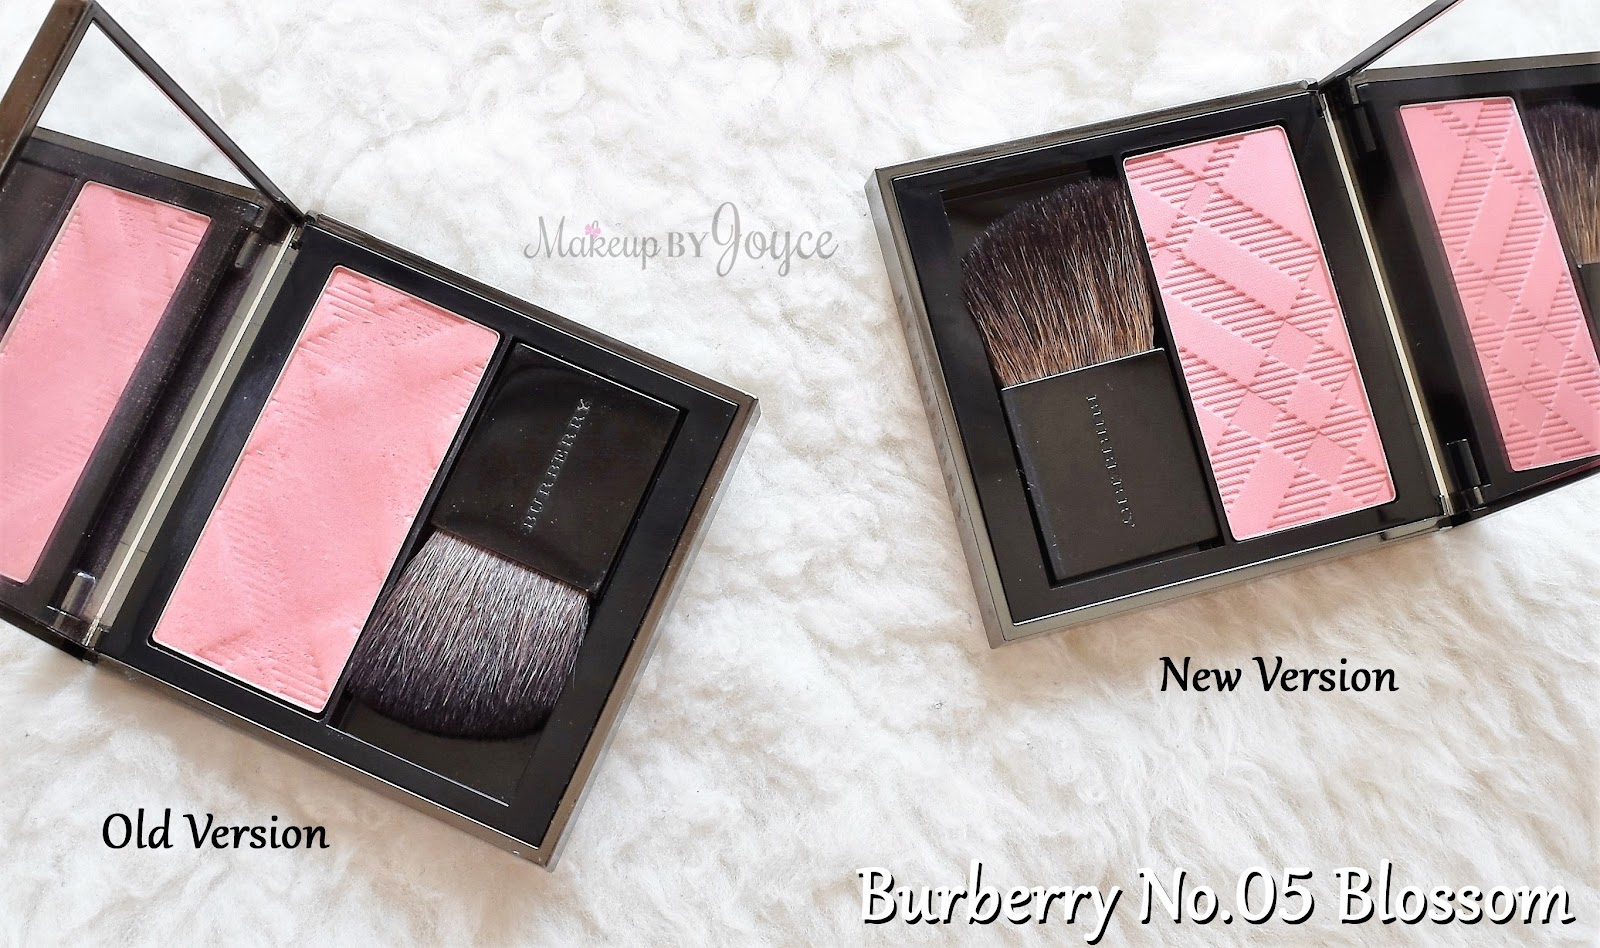 ❤ MakeupByJoyce ❤** !: Swatches + Comparisons: Burberry Light Glow Blush in  Blossom  (New Formula)